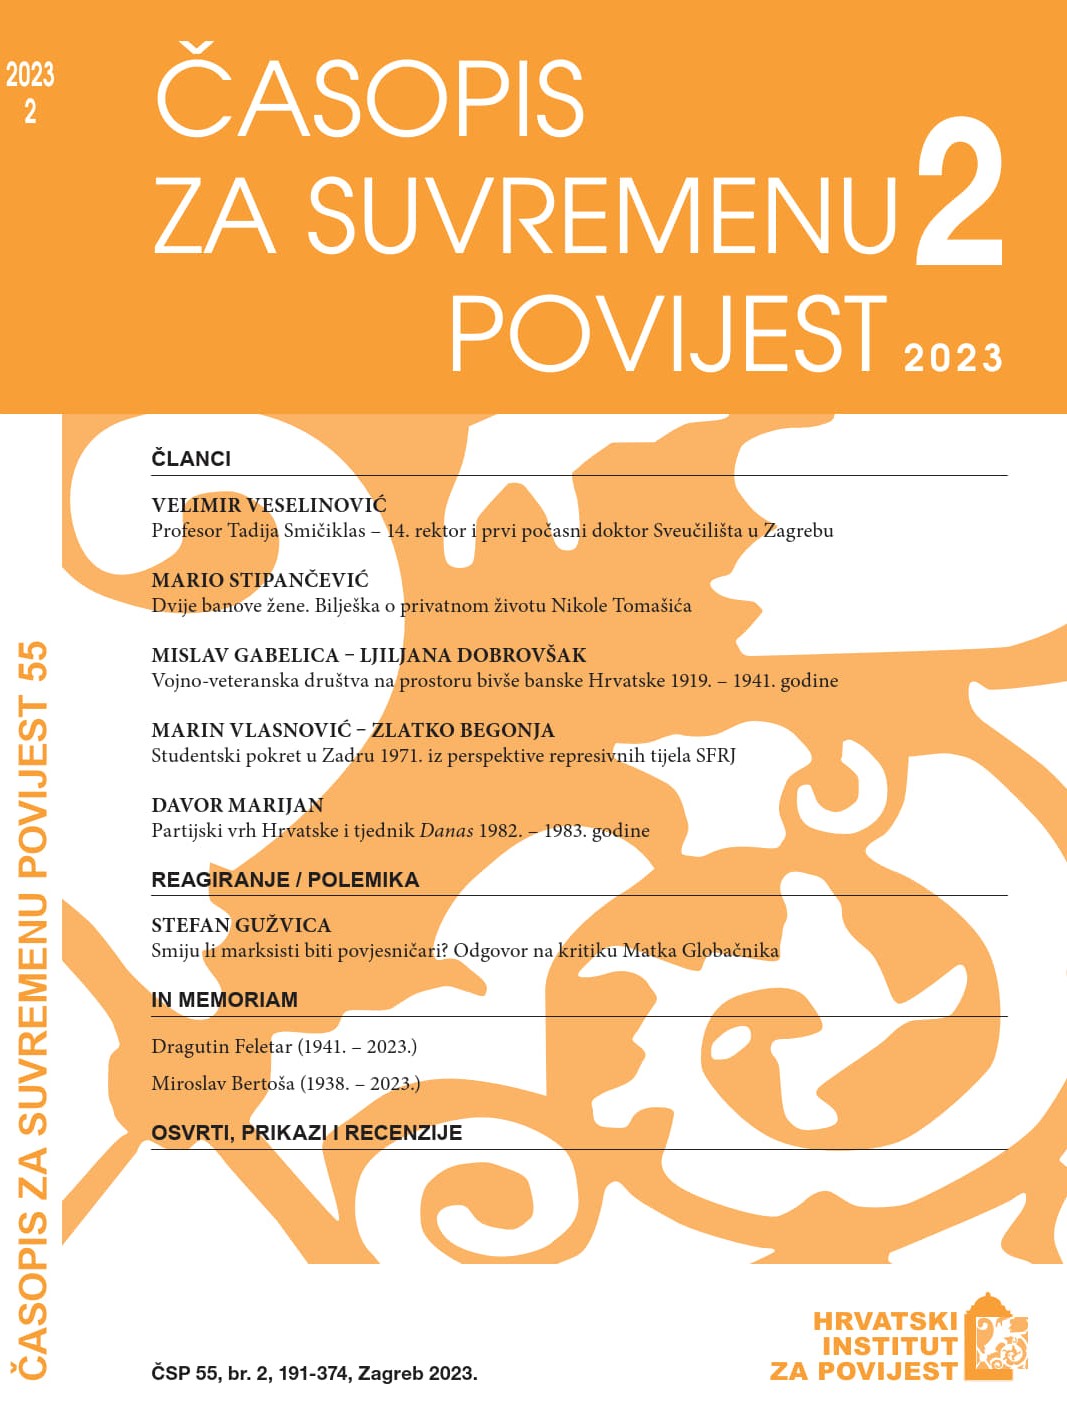 Student Movement in Zadar in 1971 from the Perspective of Repressive Bodies of the SFRJ (Socialist Federal Republic of Yugoslavia) Cover Image